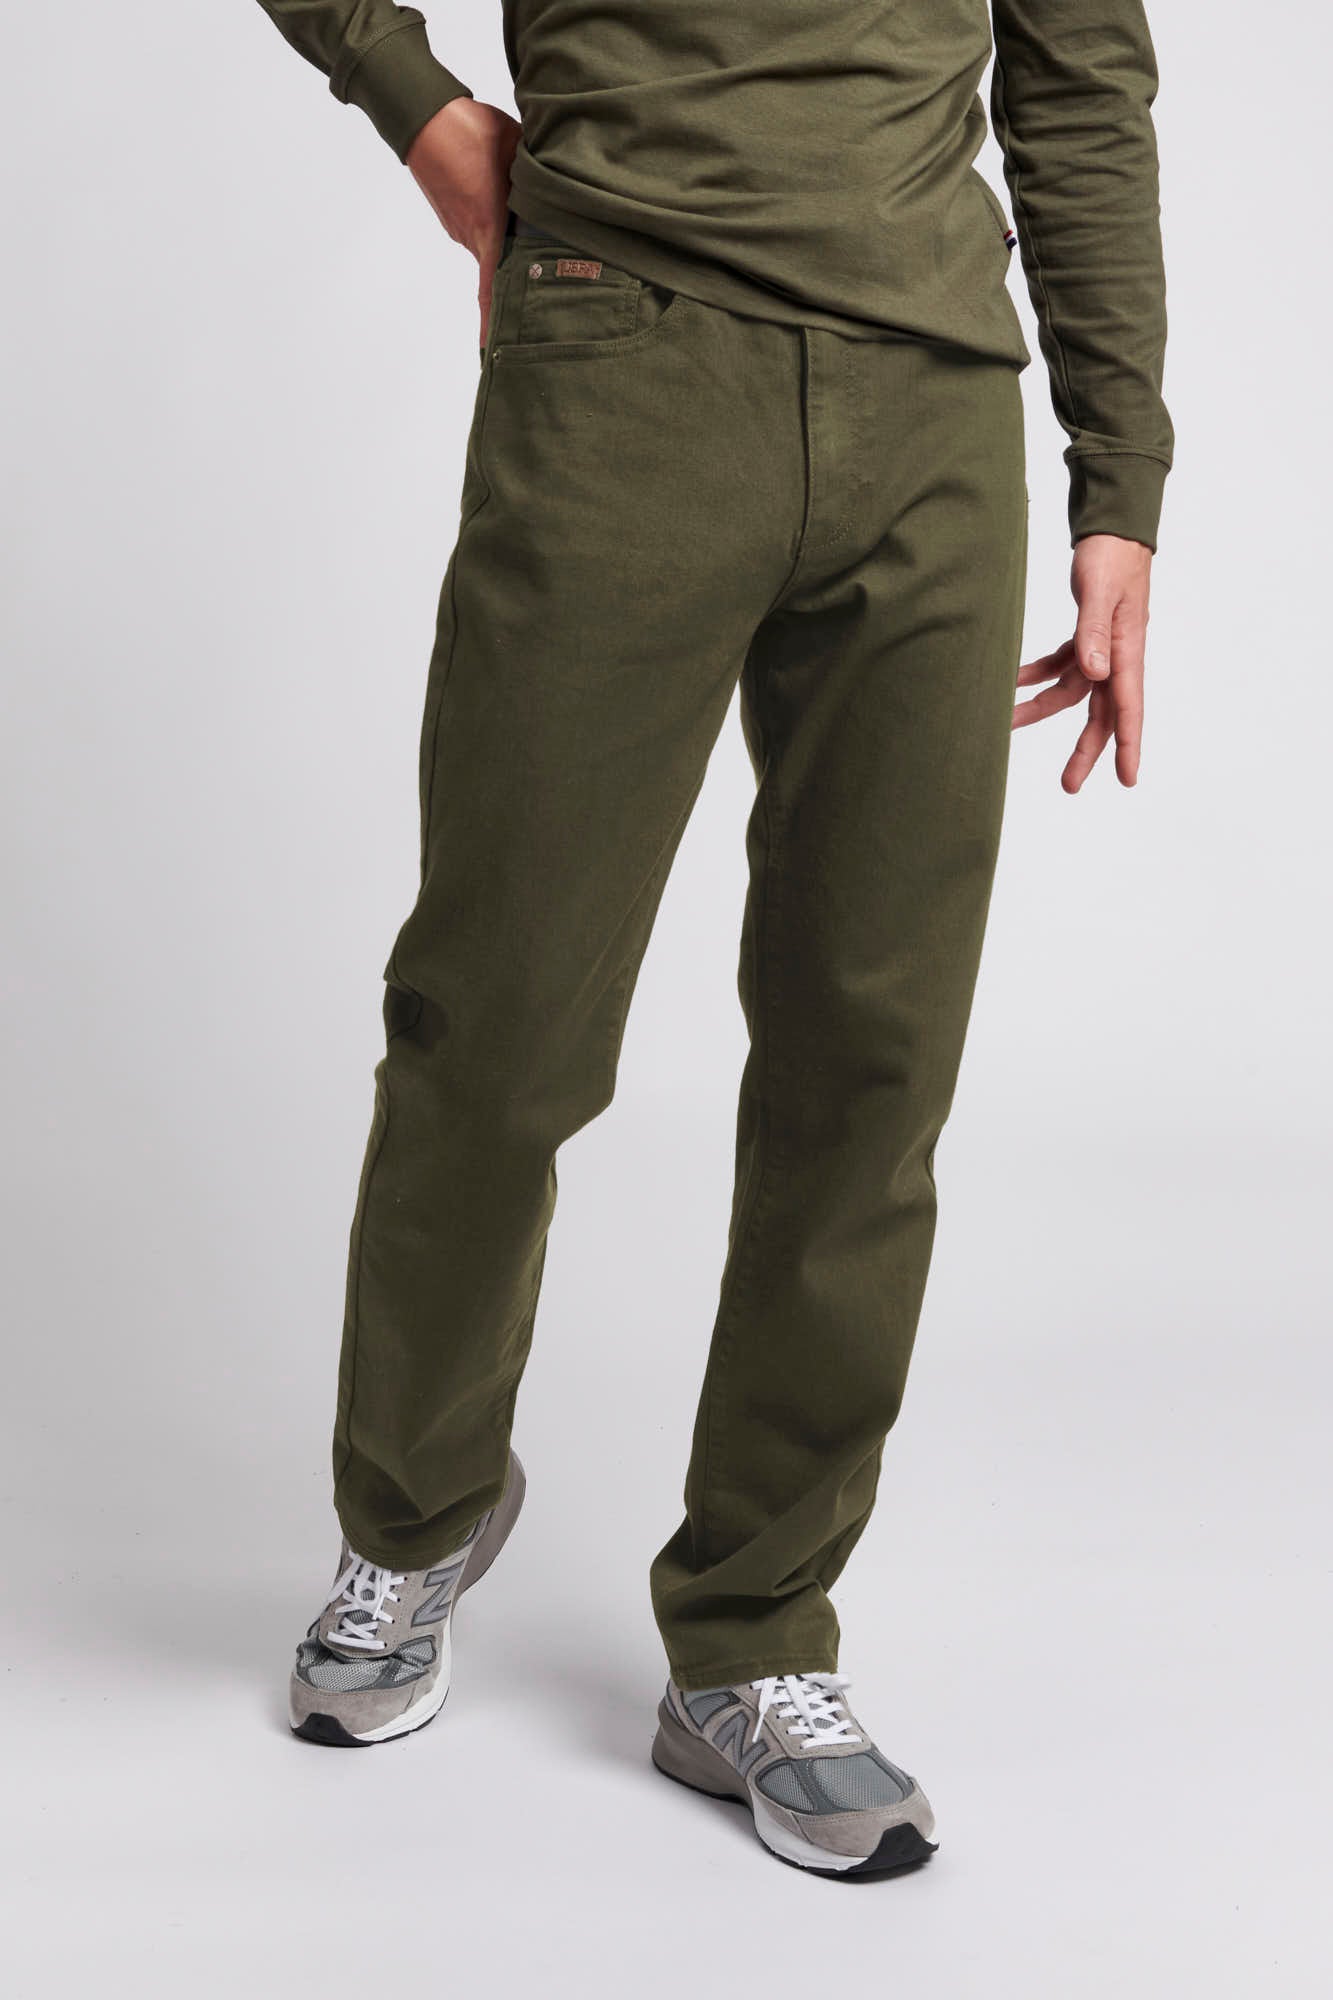 Union Five Pocket Comfort Twill Pants for Men in Grey